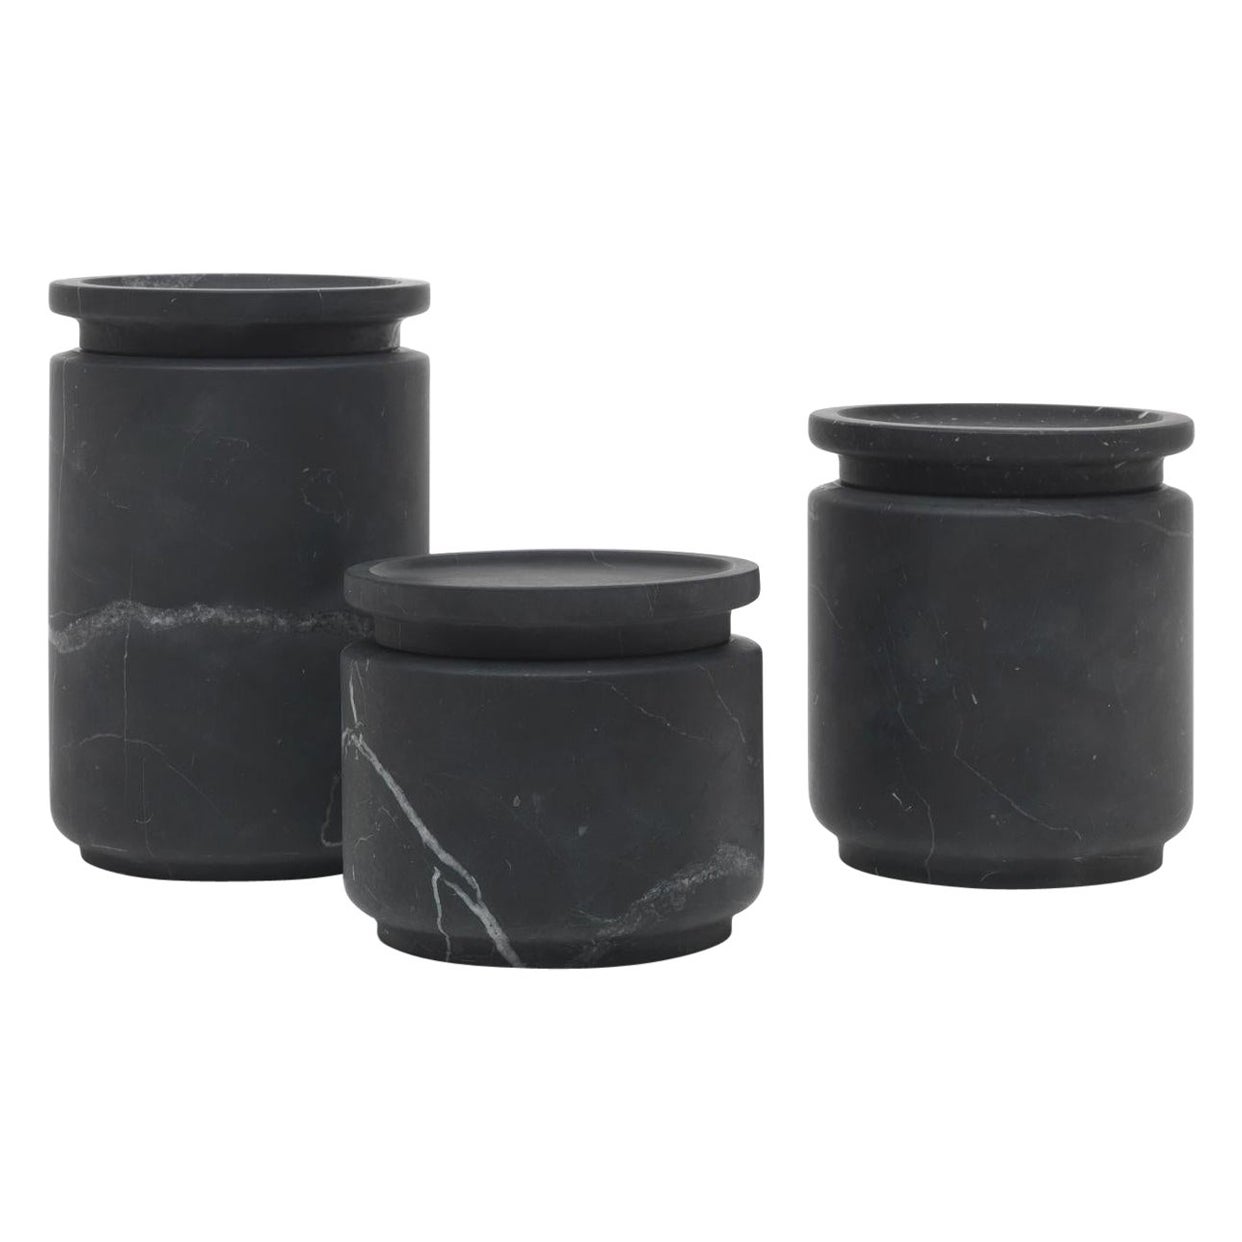 Set of 3 Pyxis Pots, Black by Ivan Colominas For Sale